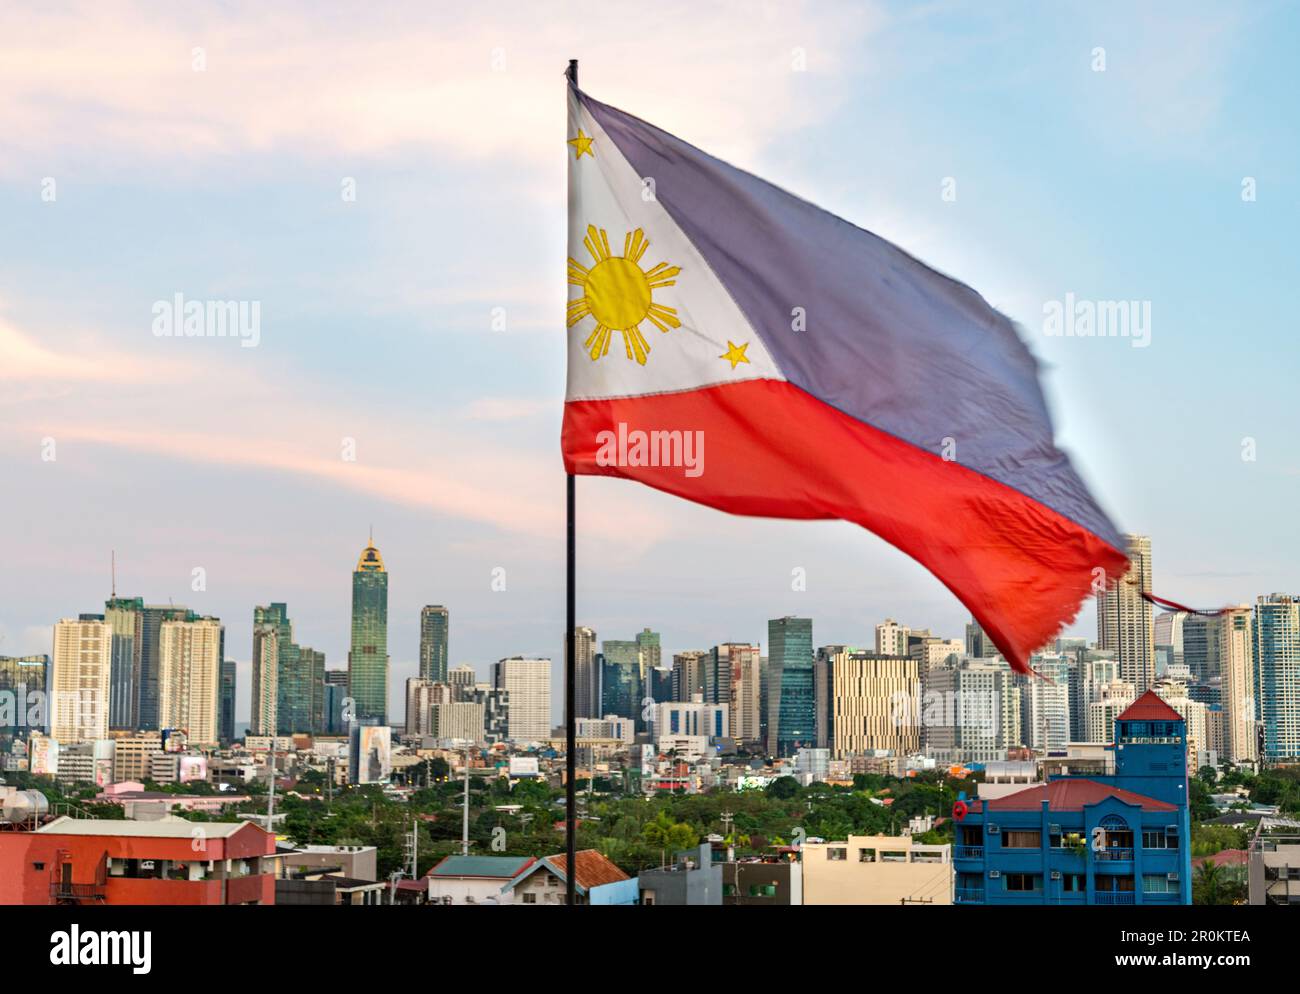 In the early evening afterglow of sunset,the red,blue and white Philippine flag flies,with it's golden sun and stars showing, in the warm breeze, on a Stock Photo